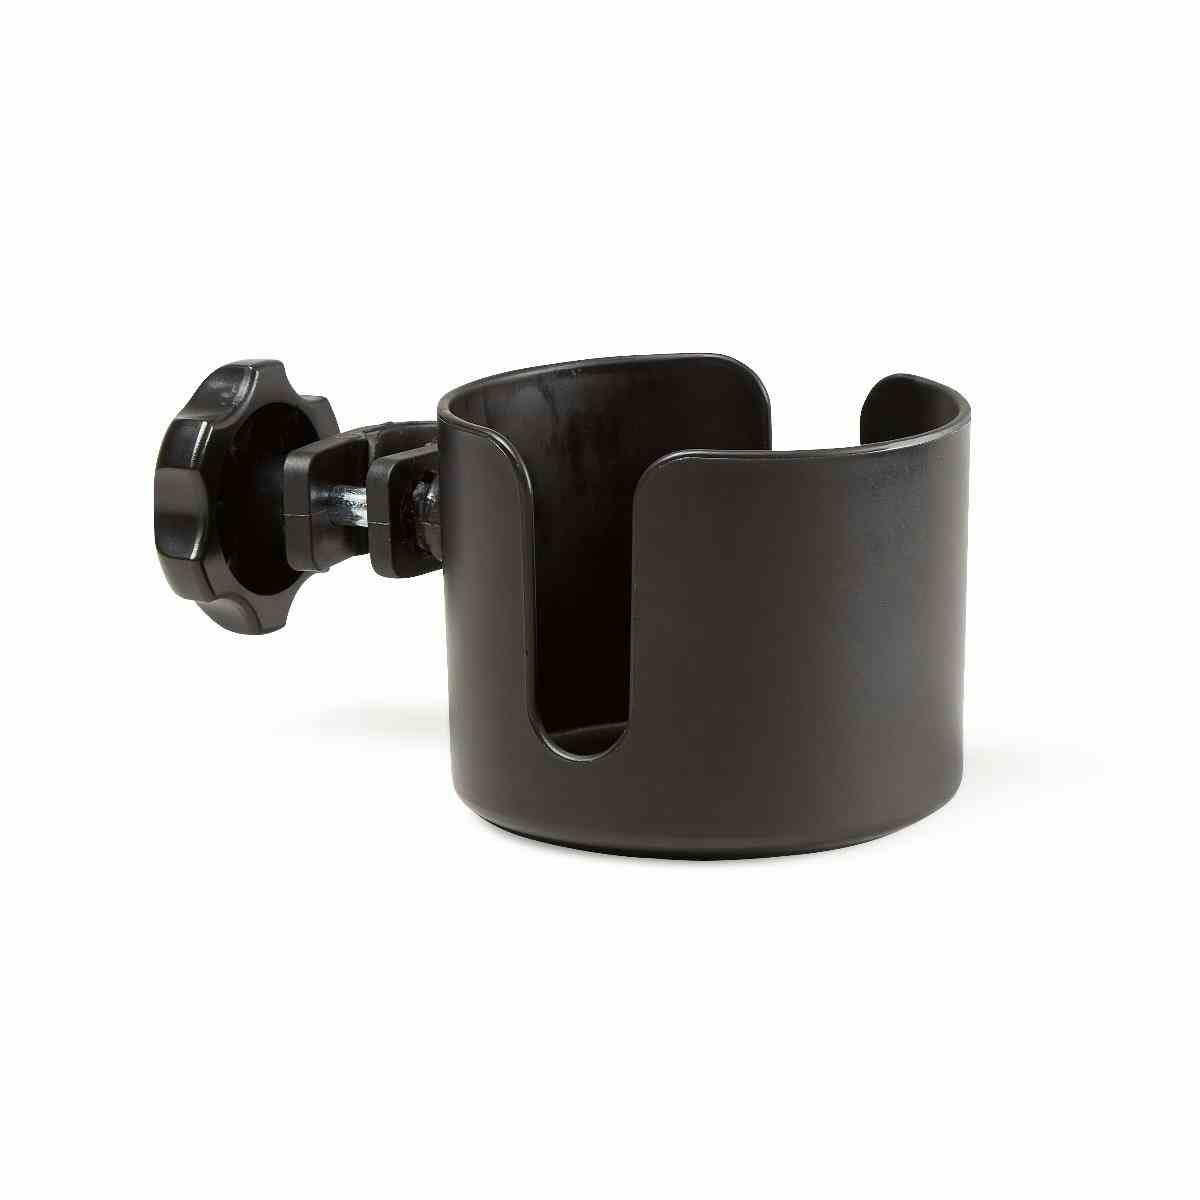 Medline ADL Cup Holder for Wheelchairs , WCACUP, 1 Each 